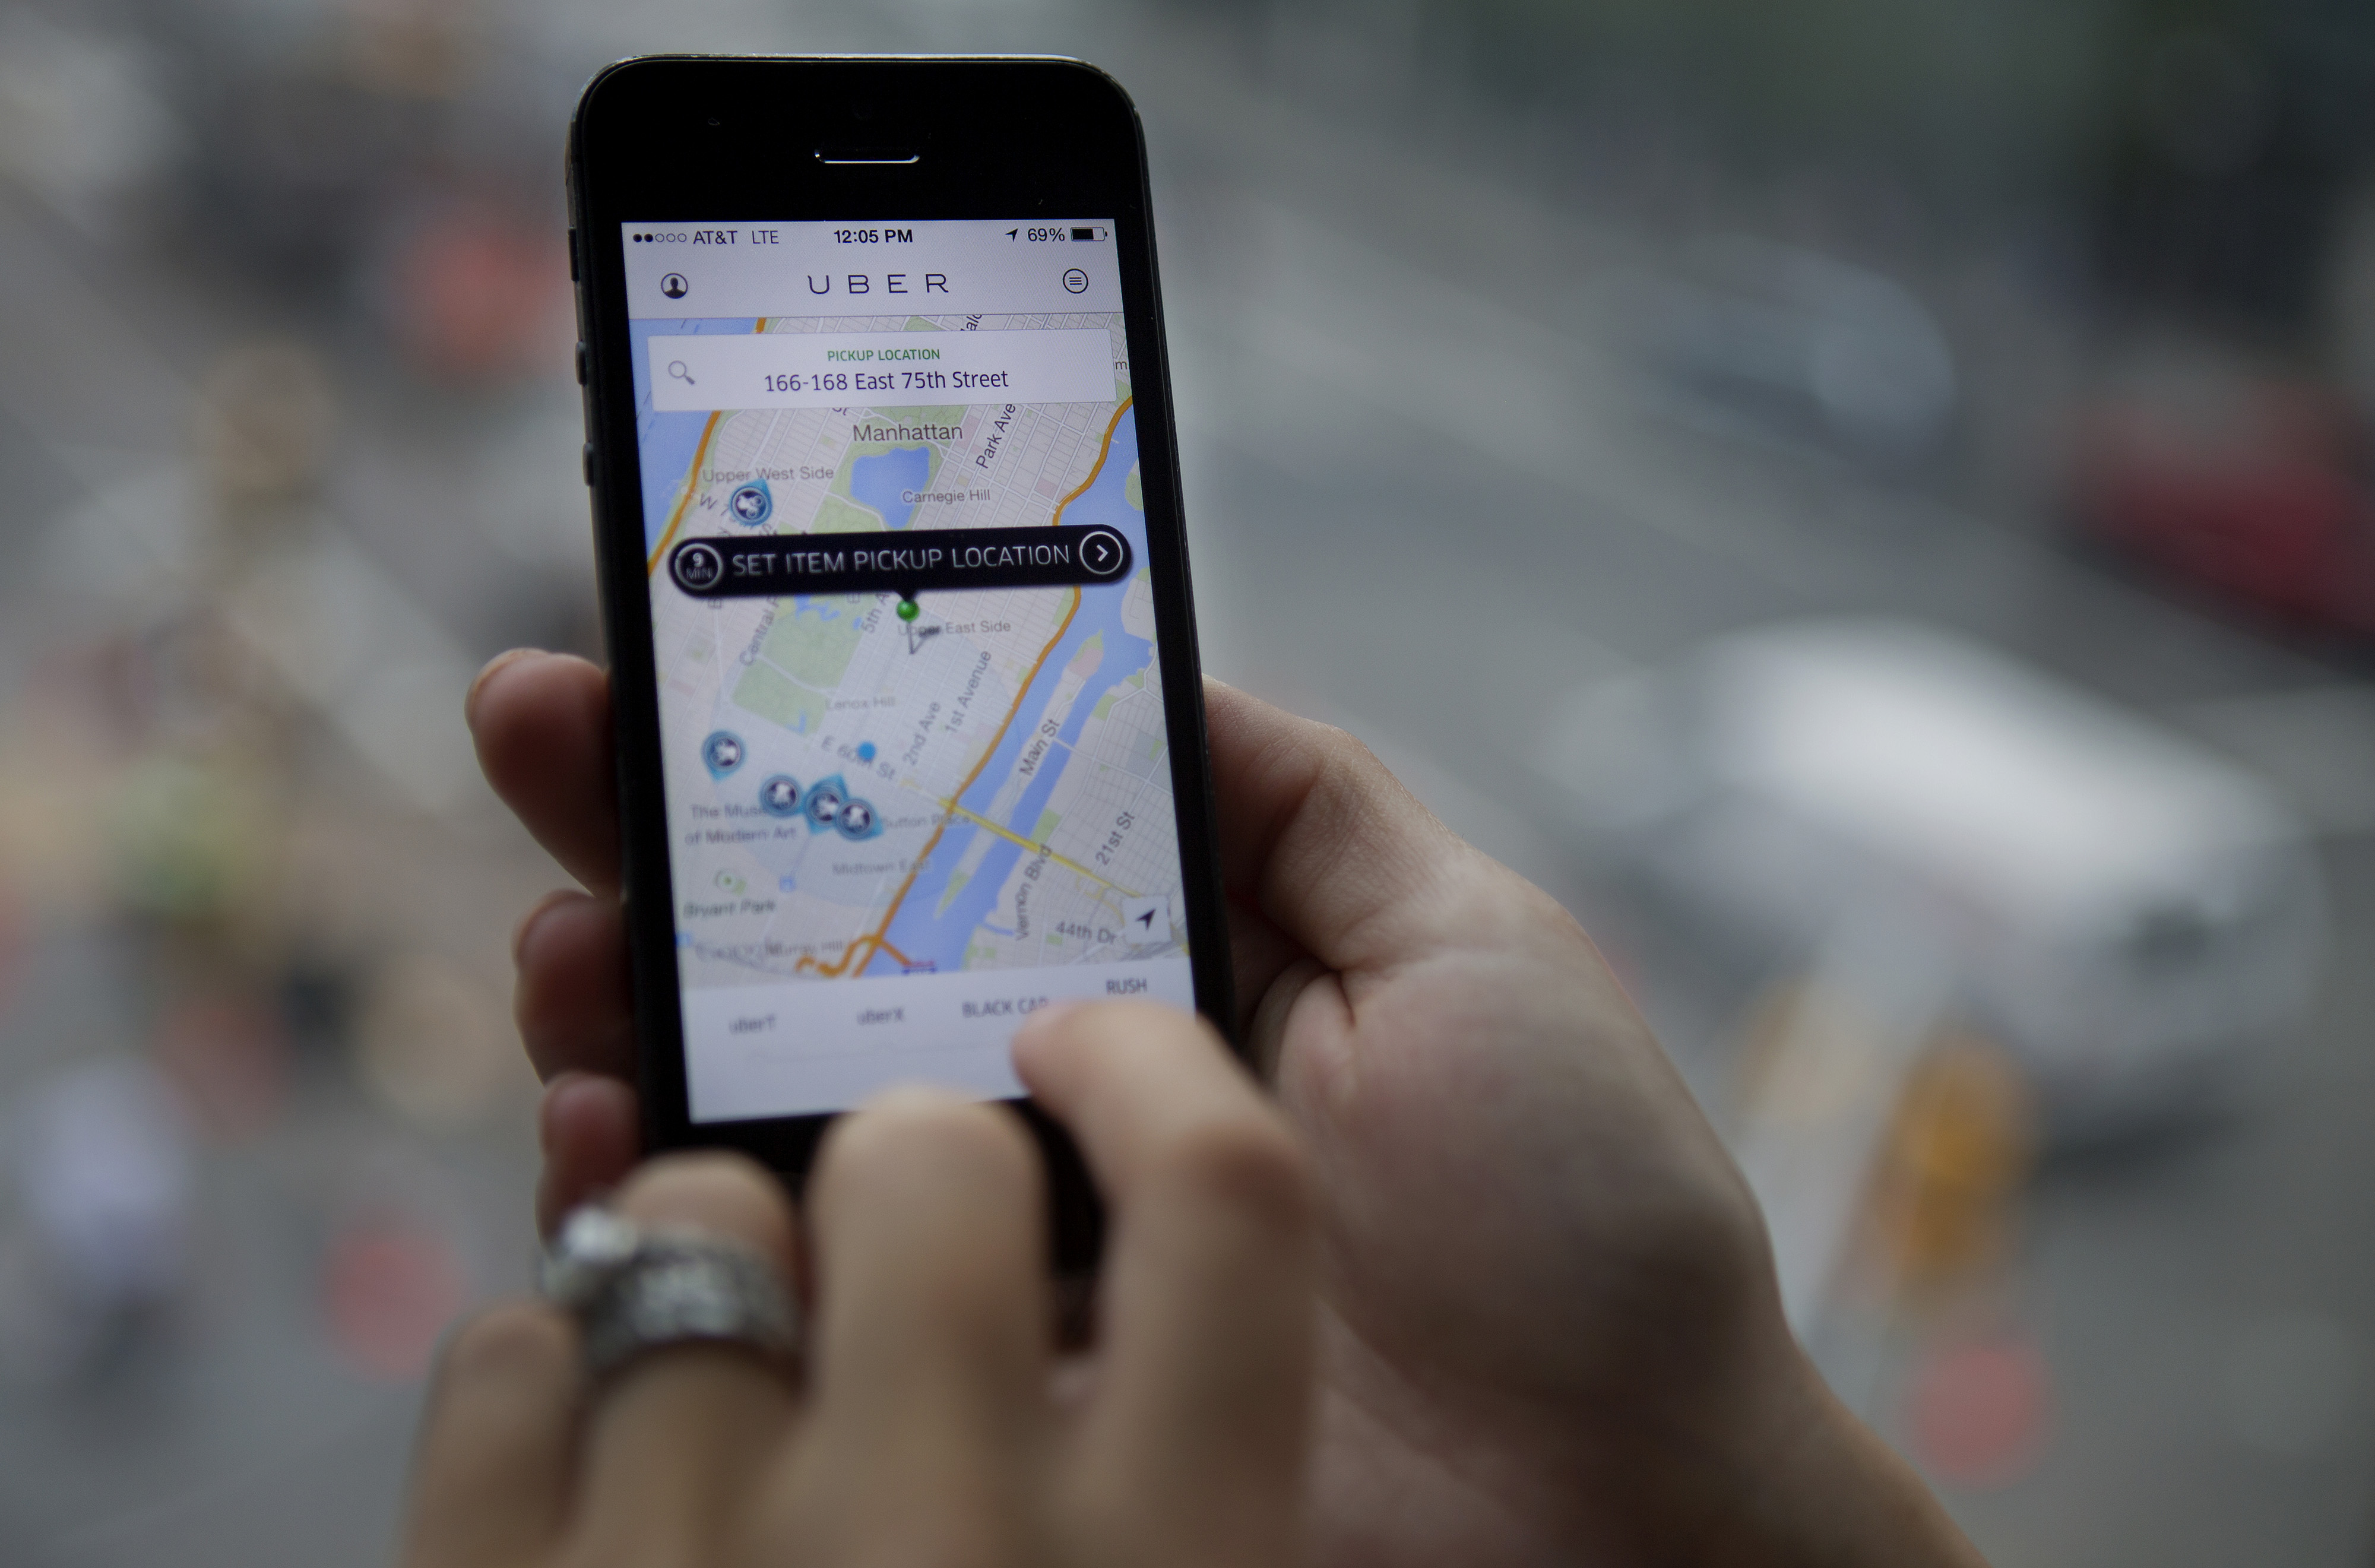 The Uber app is demonstrated for a photograph on an iPhone in New York City on Aug. 6, 2014 (Bloomberg via Getty Images)